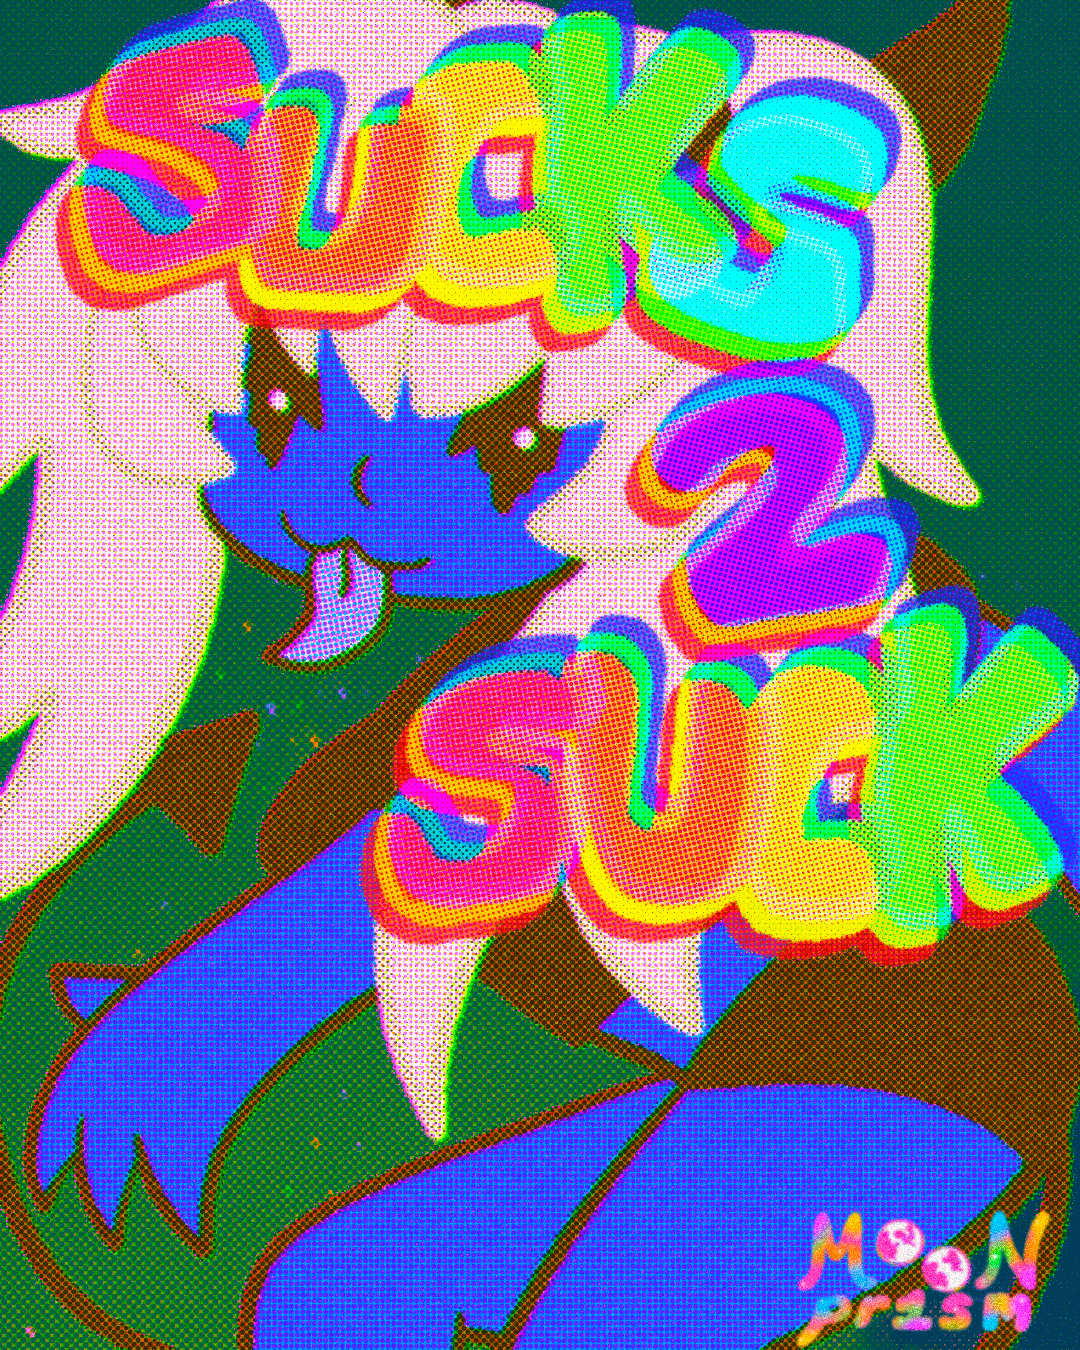 An illustration of a blue demon character with fluffy white hair looking mischevious with their tongue sticking out. Rainbow block text reads 'Sucks 2 Suck'.